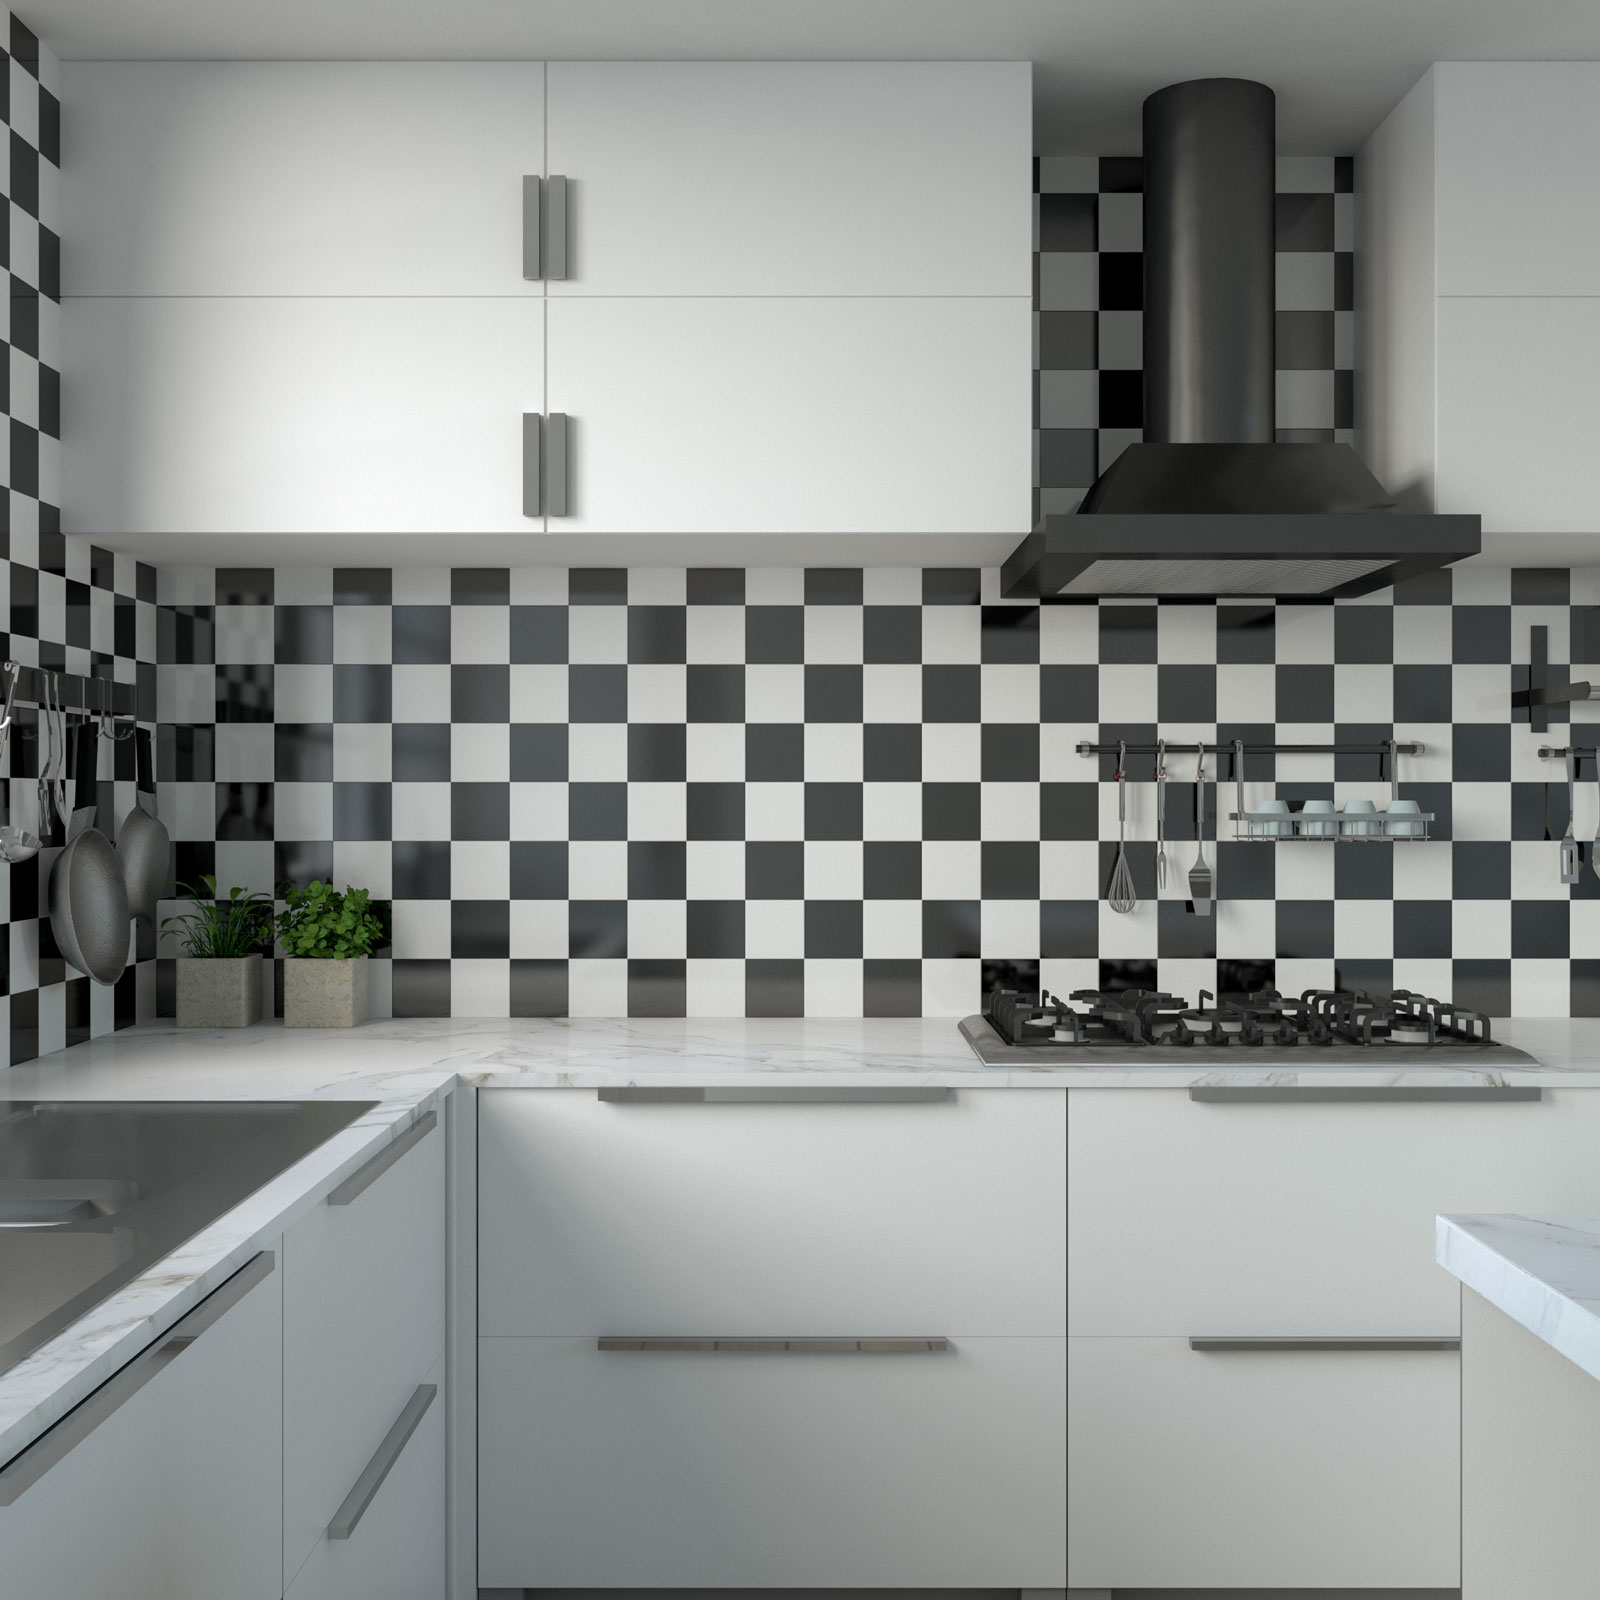 Kitchen ideas with white cabinets and black and white checkerboard backsplash